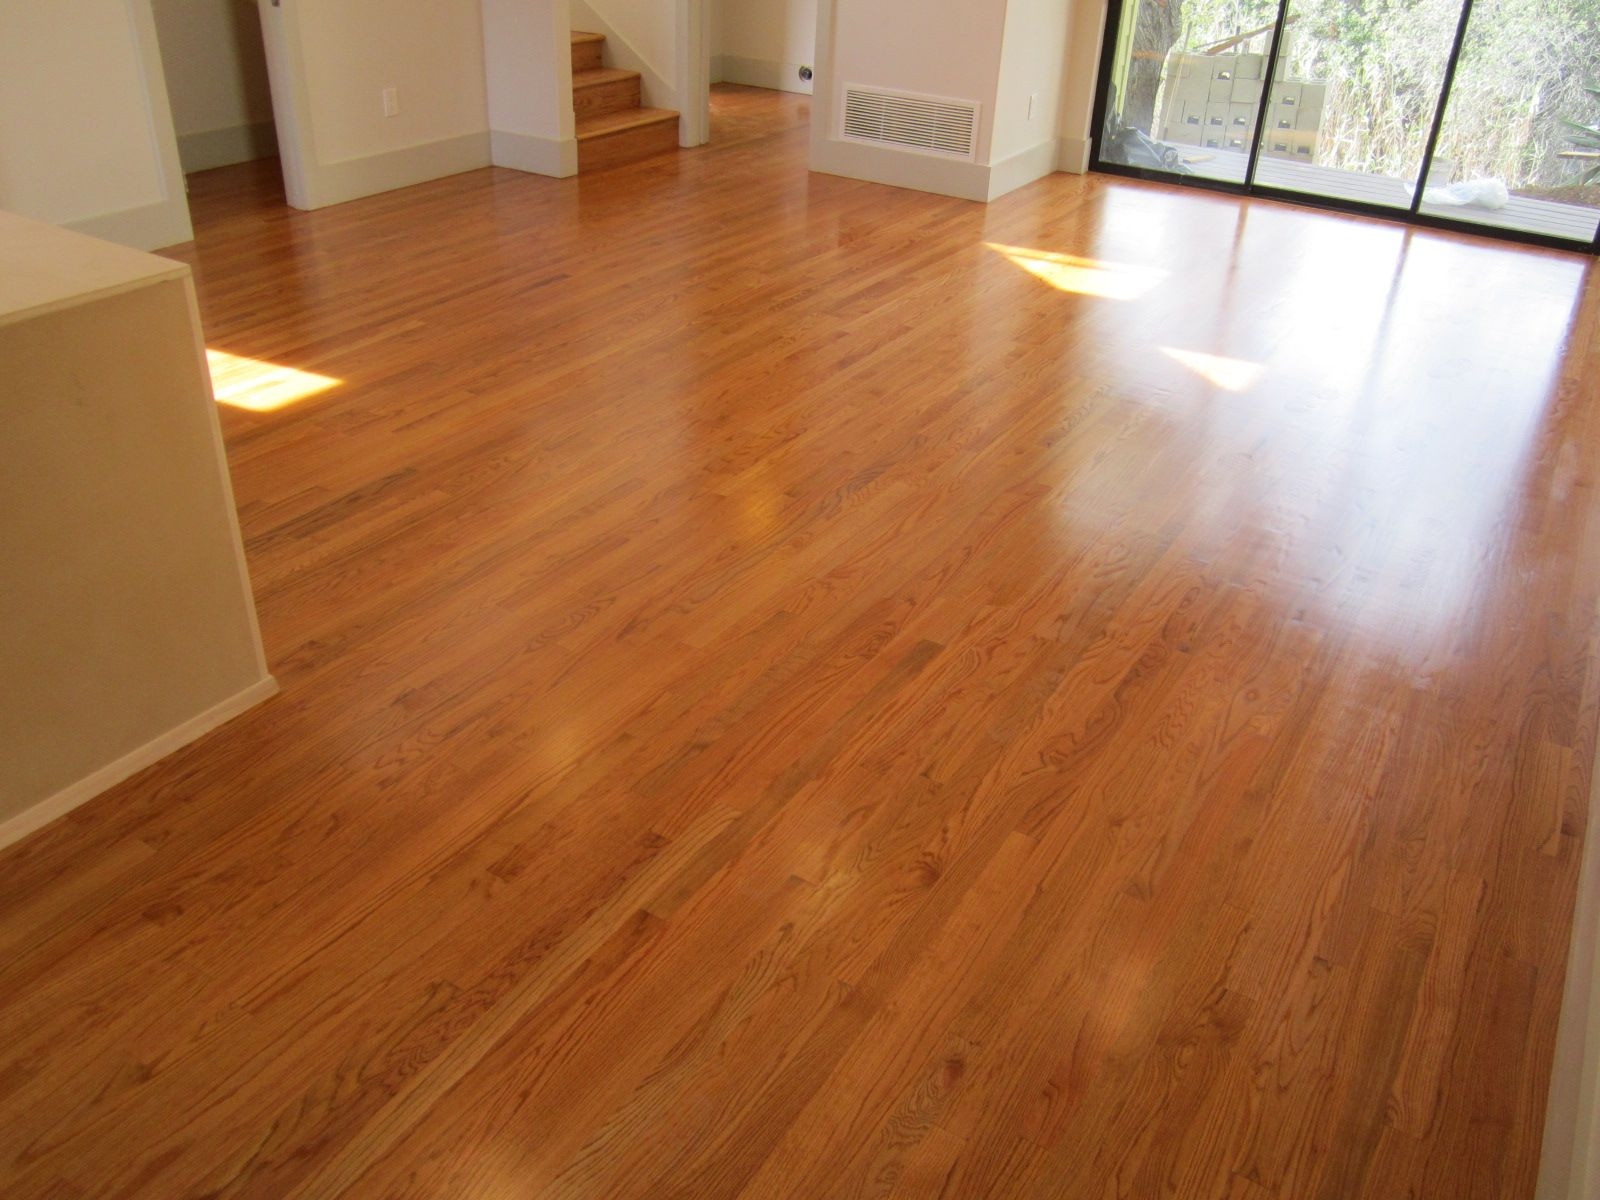 12 Unique Cost to Sand and Refinish Hardwood Floors Uk 2024 free download cost to sand and refinish hardwood floors uk of hardwood floor refinishing floor plan ideas with regard to stained concrete floors cost vs tile ideas for home floor design topics upload with